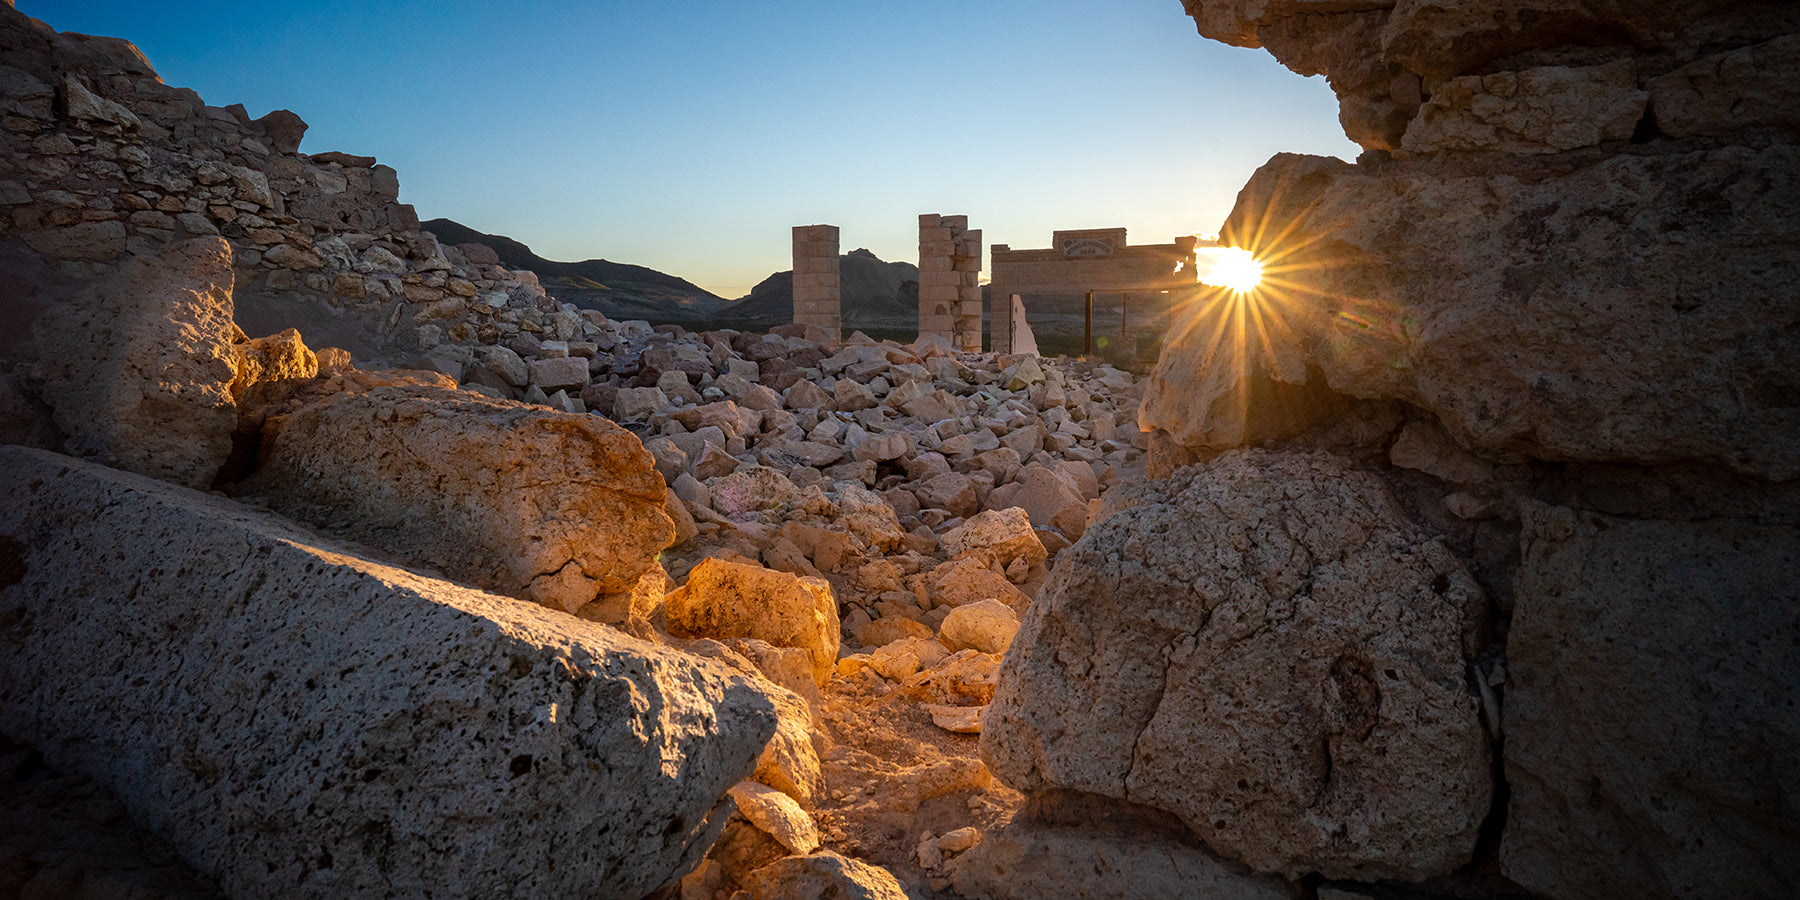 Photographing the Rhyolite Ghost Town